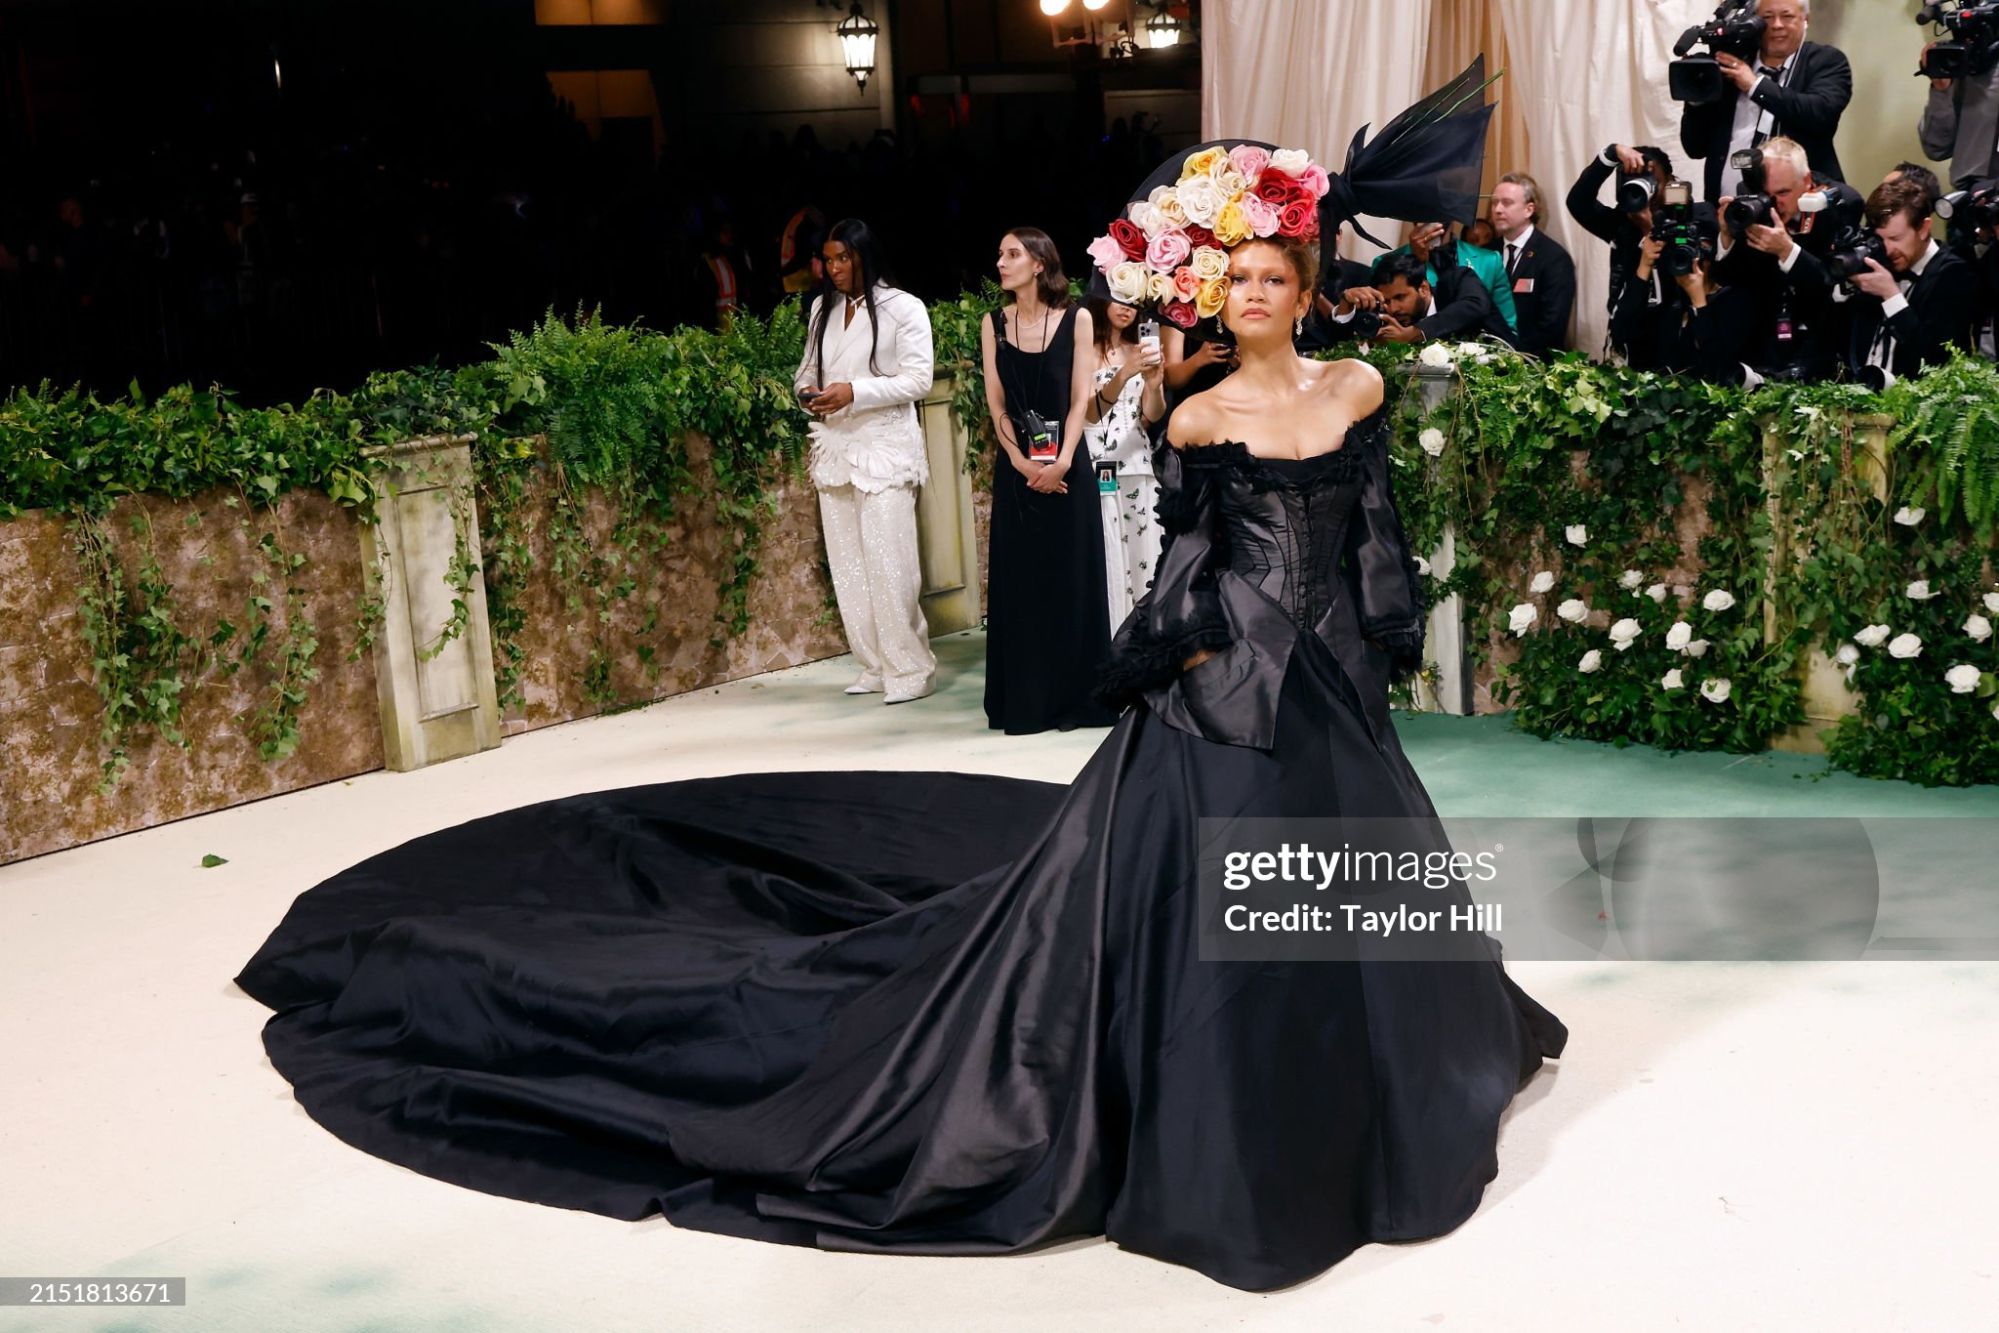 gettyimages-2151813671-2048x2048.jpg